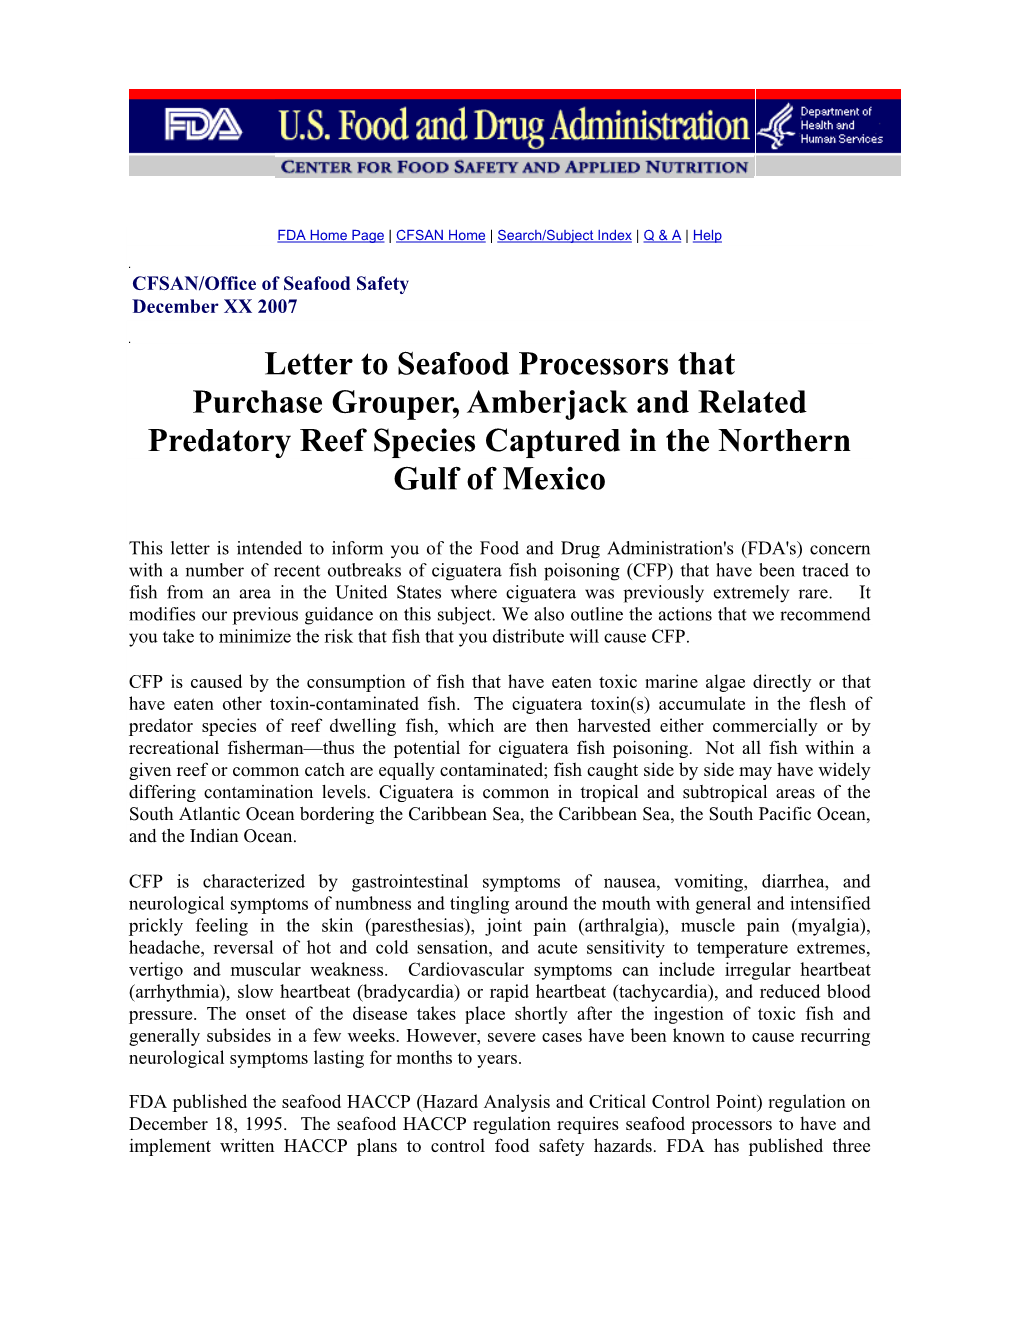 Letter to Seafood Processors That Purchase Grouper, Amberjack and Related Predatory Reef Species Captured in the Northern Gulf of Mexico